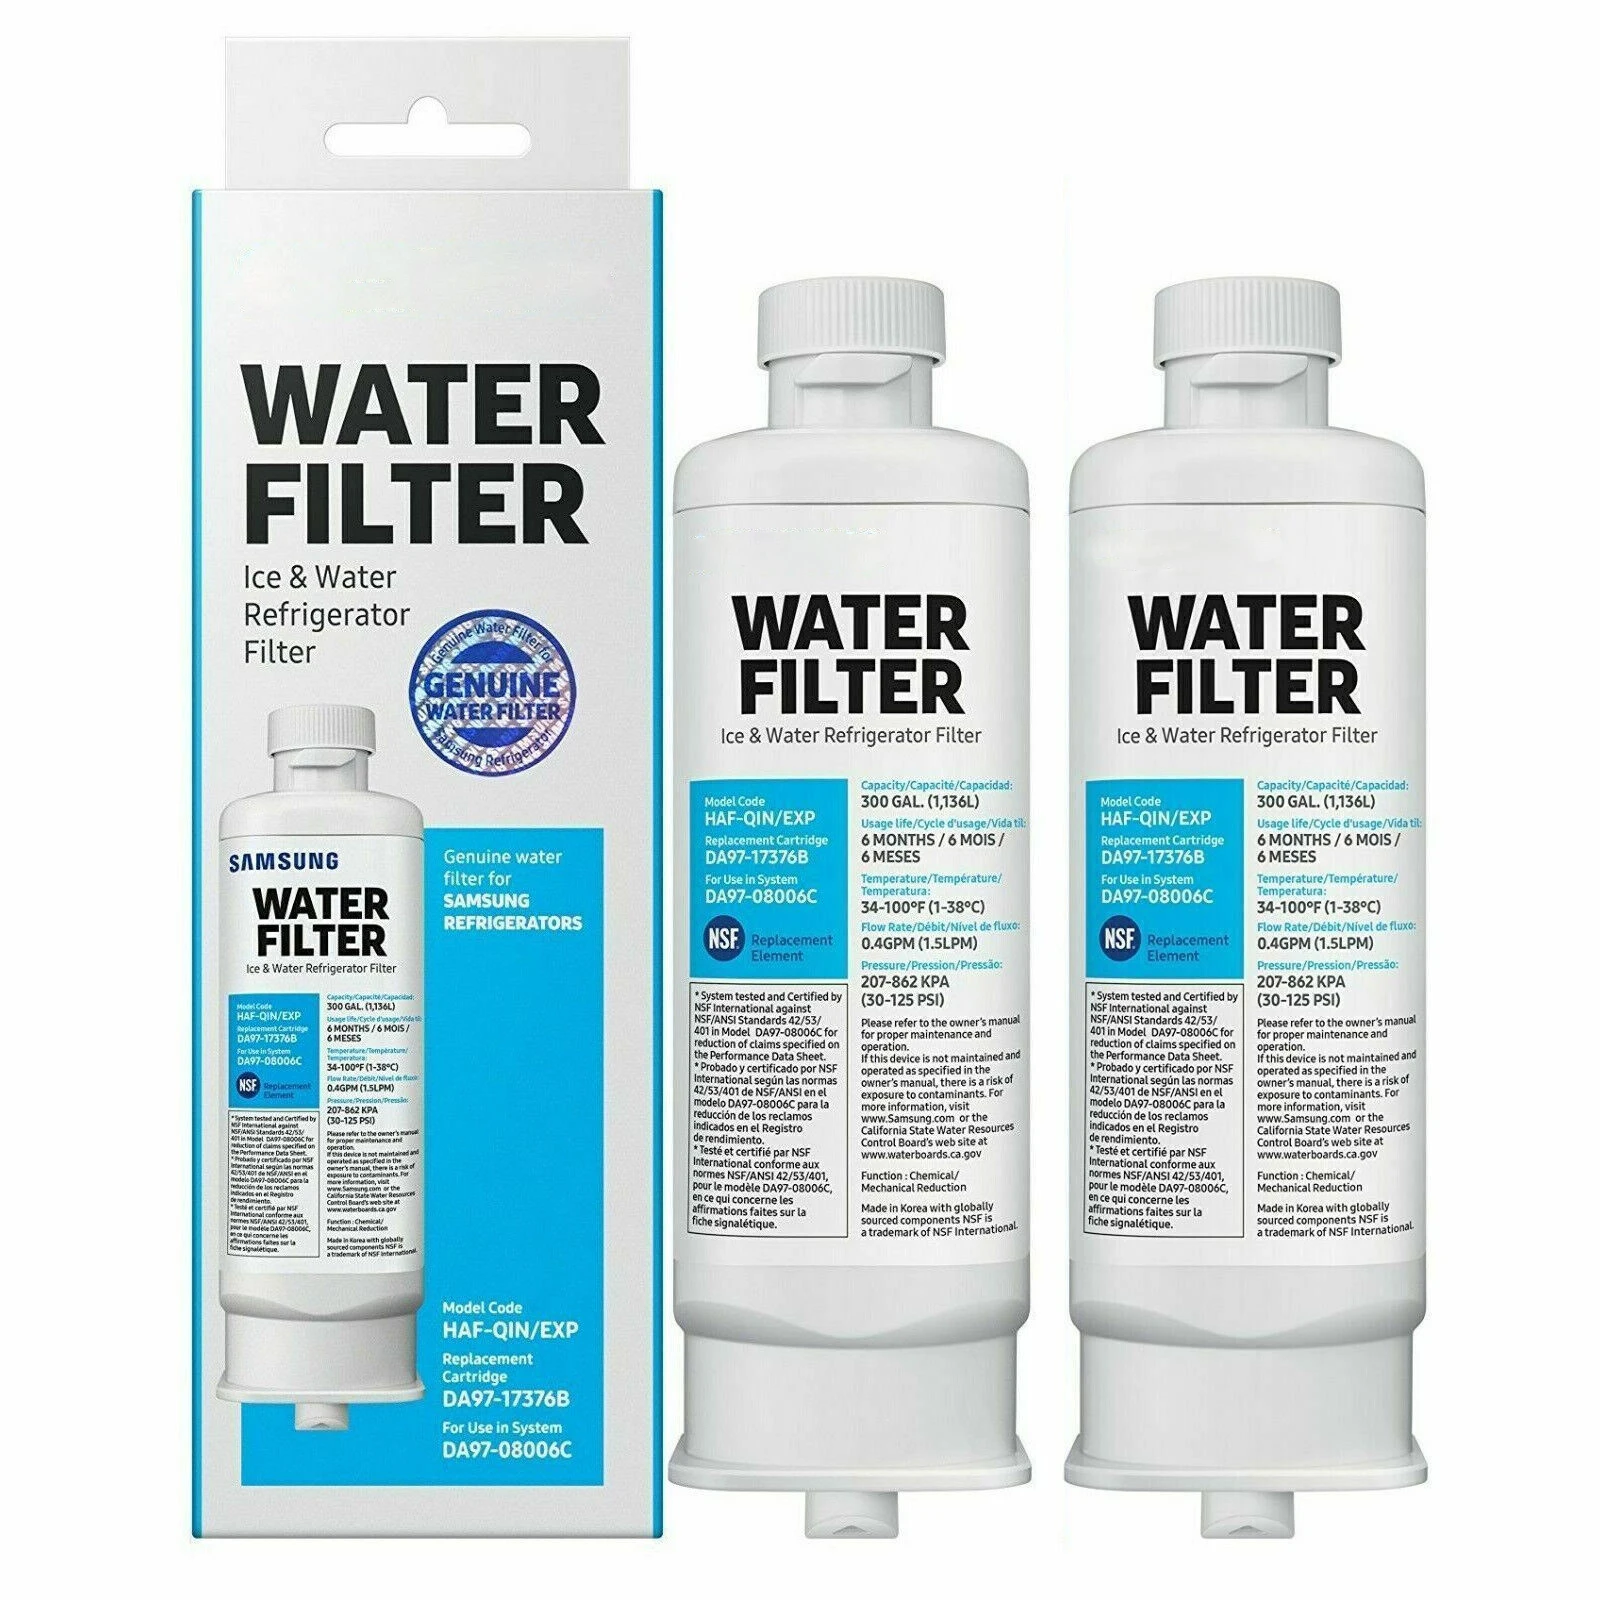 2Pack Fits for DA97-17376B HAF-QIN/EXP Samsung Refrigerator Water Filter White New